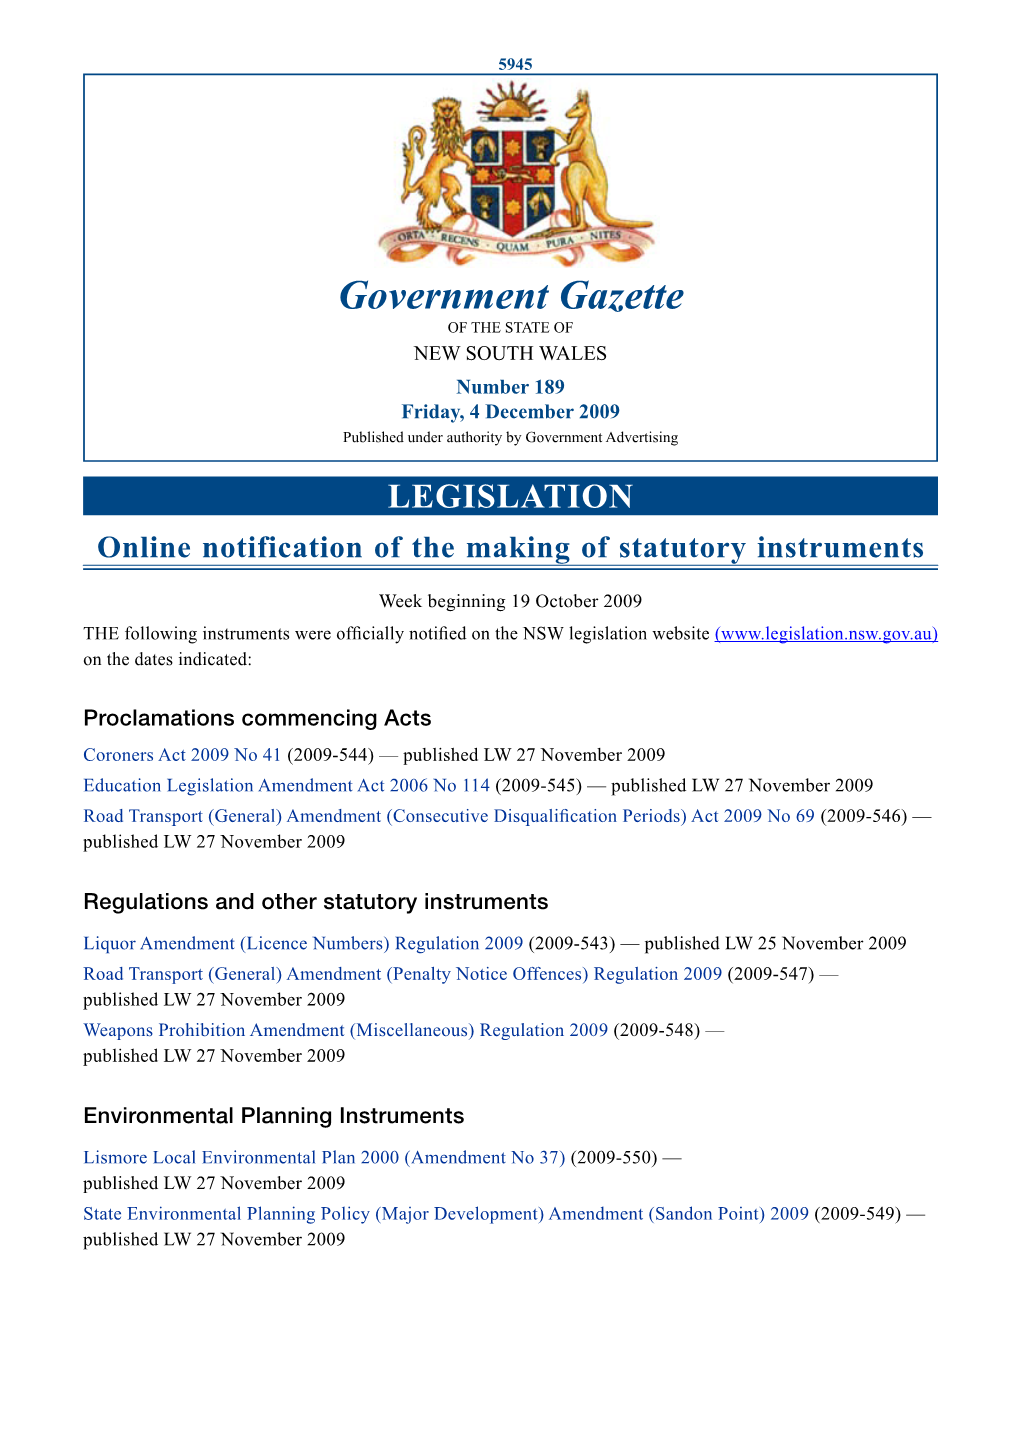 Government Gazette of the STATE of NEW SOUTH WALES Number 189 Friday, 4 December 2009 Published Under Authority by Government Advertising